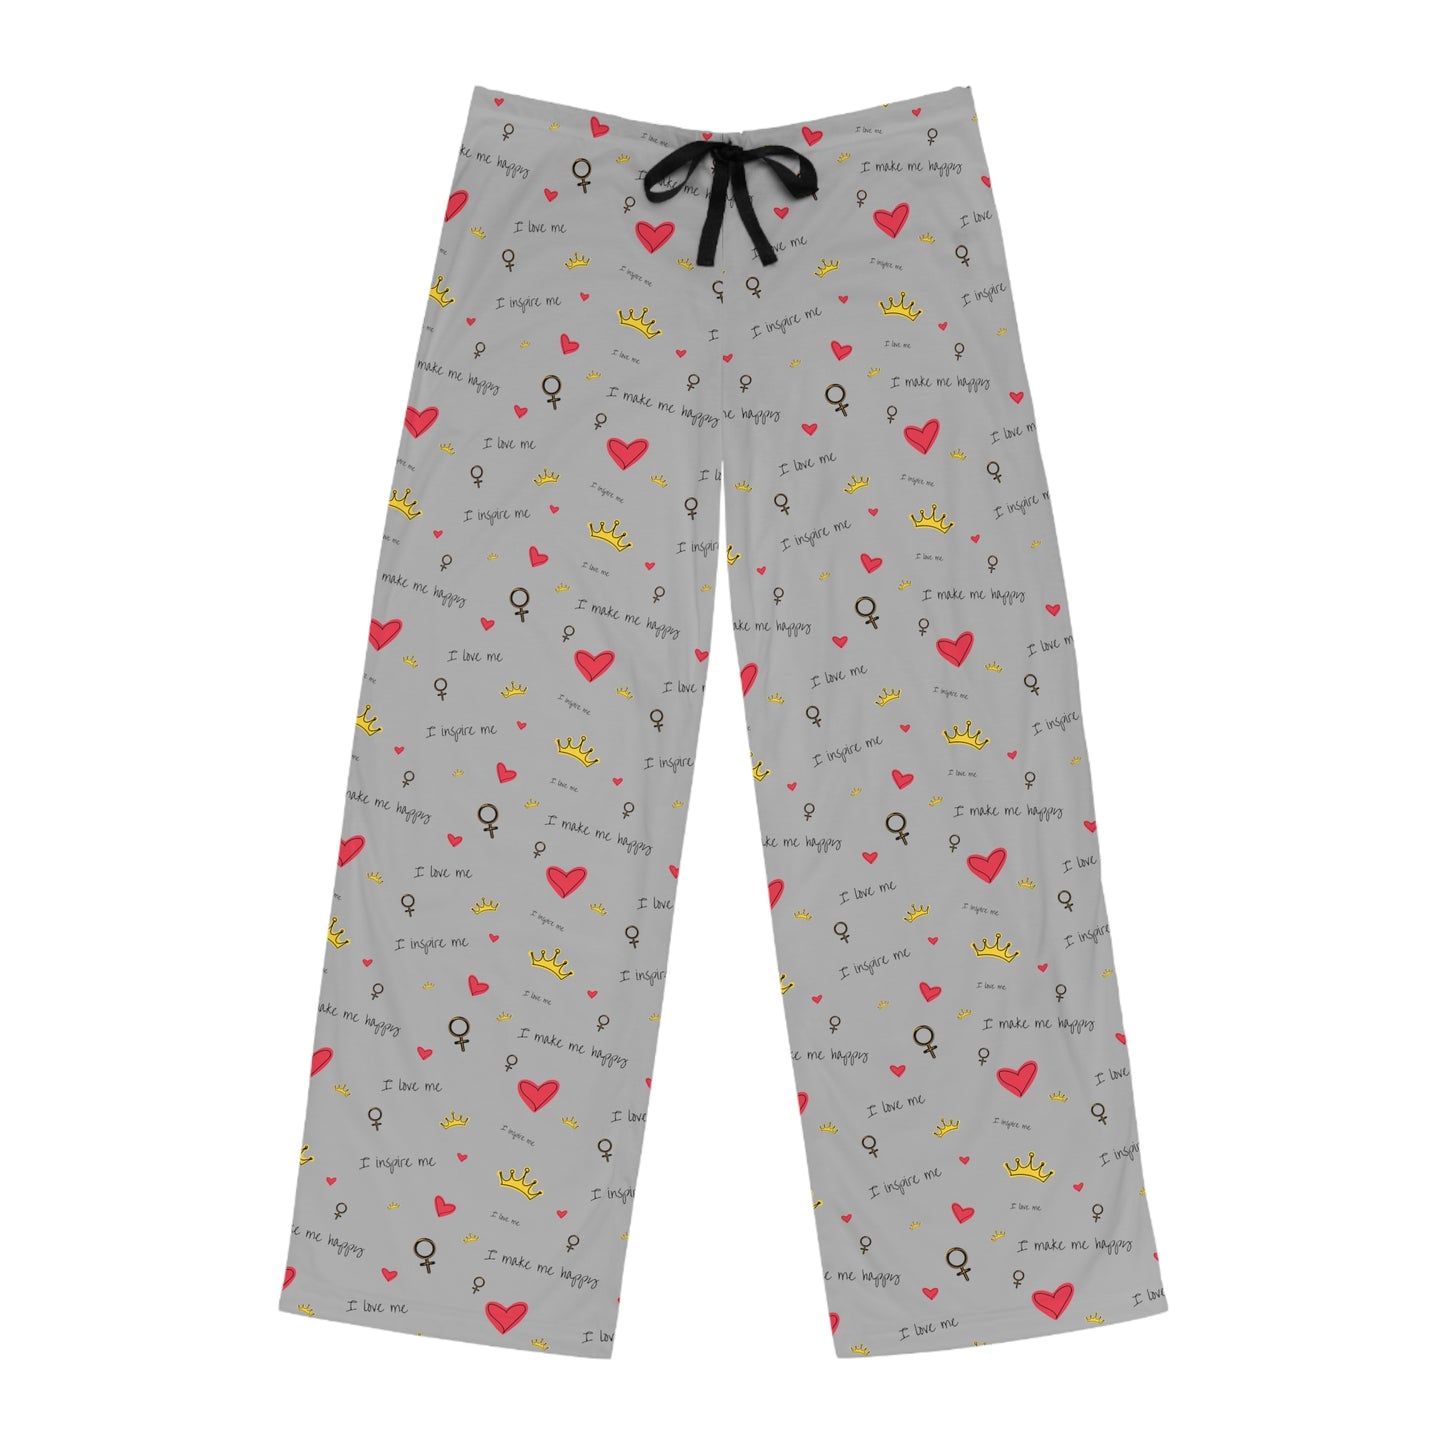 Men's Printify grey pajama pants with hearts, made of 100% polyester - a perfect Valentine's Day gift.